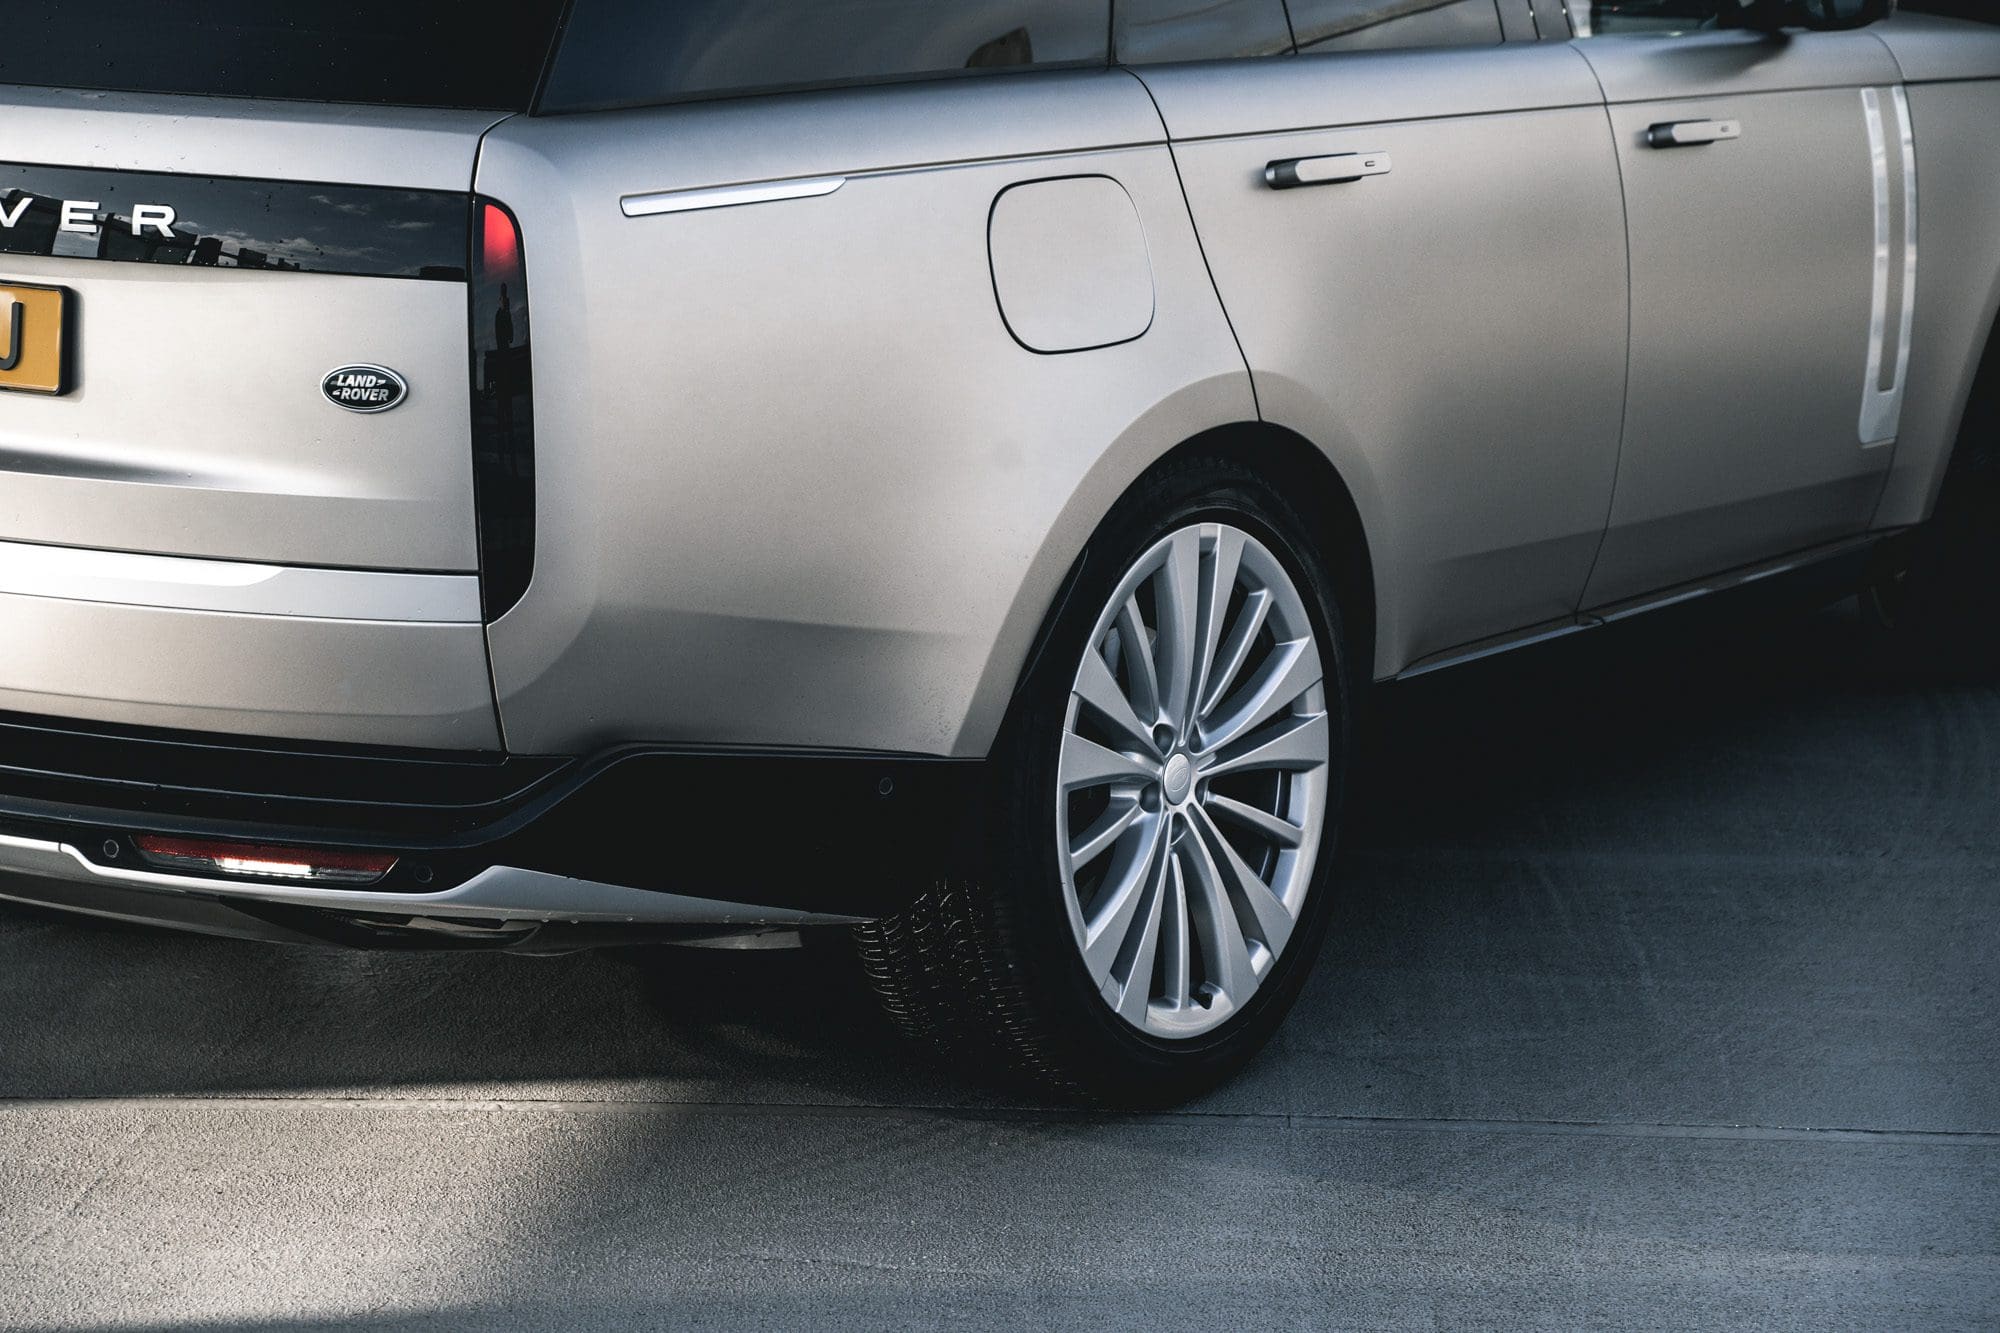 Range Rover P530, Overdaad aan luxe getest: de <strong>Range Rover P530 First Edition (2023)</strong>